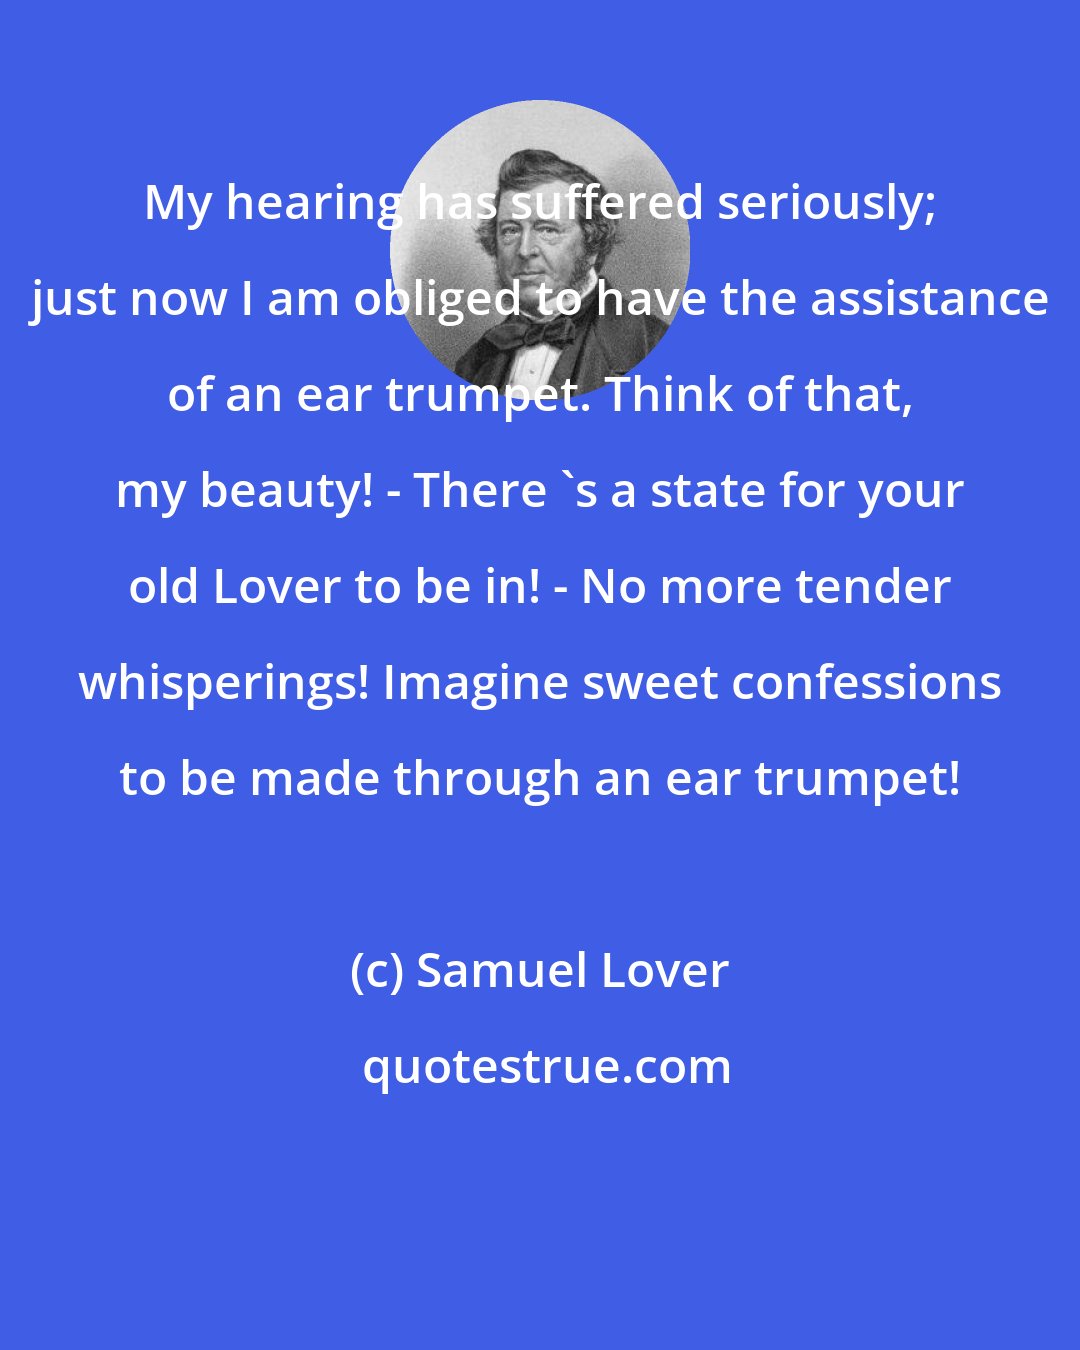 Samuel Lover: My hearing has suffered seriously; just now I am obliged to have the assistance of an ear trumpet. Think of that, my beauty! - There 's a state for your old Lover to be in! - No more tender whisperings! Imagine sweet confessions to be made through an ear trumpet!